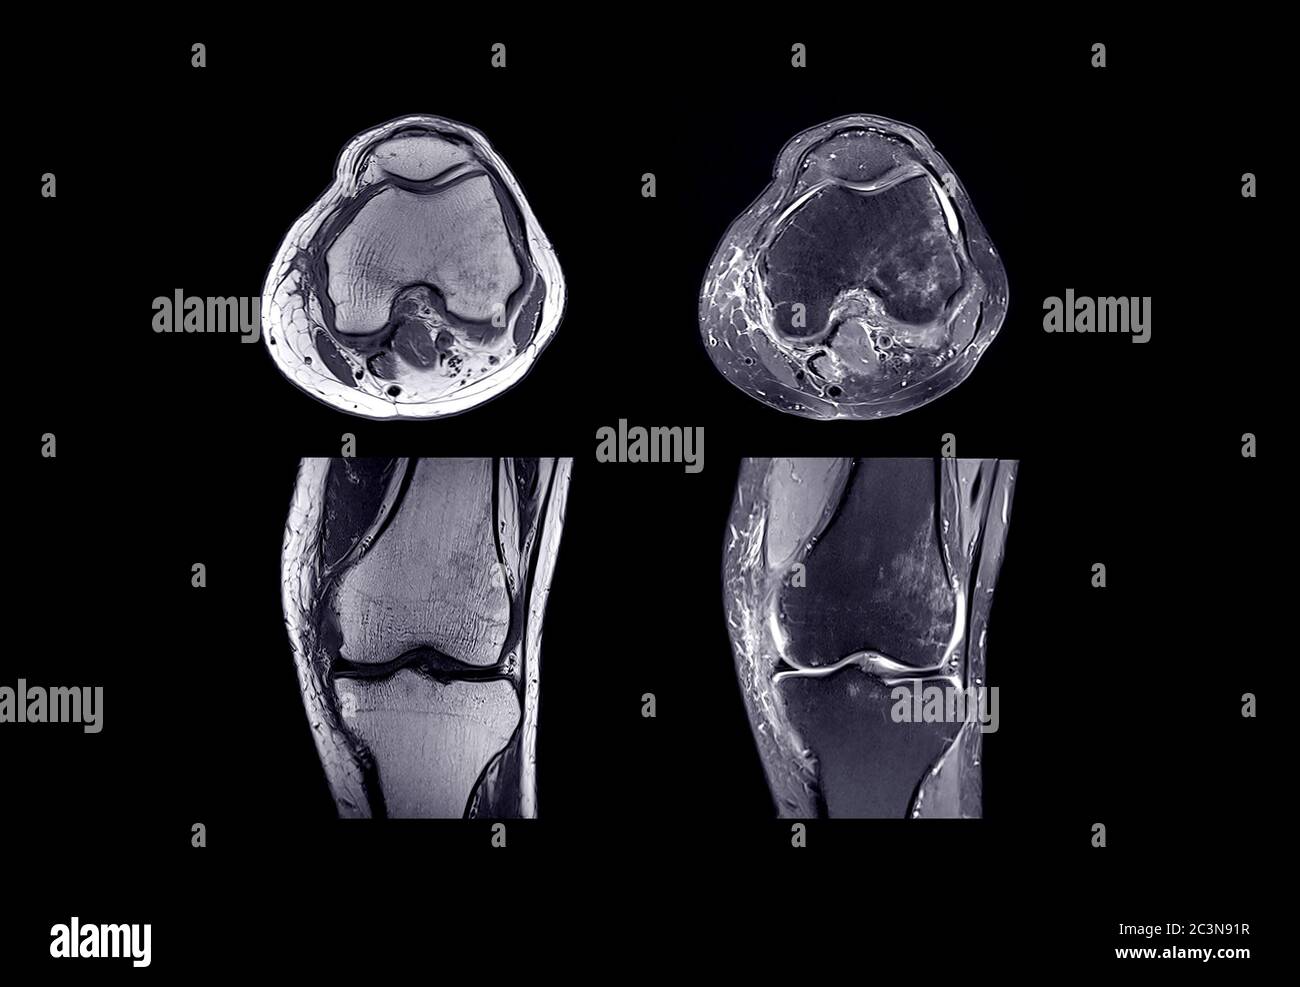 MRI knee joint or Magnetic resonance imaging comparison Axial and coronal view. Stock Photo